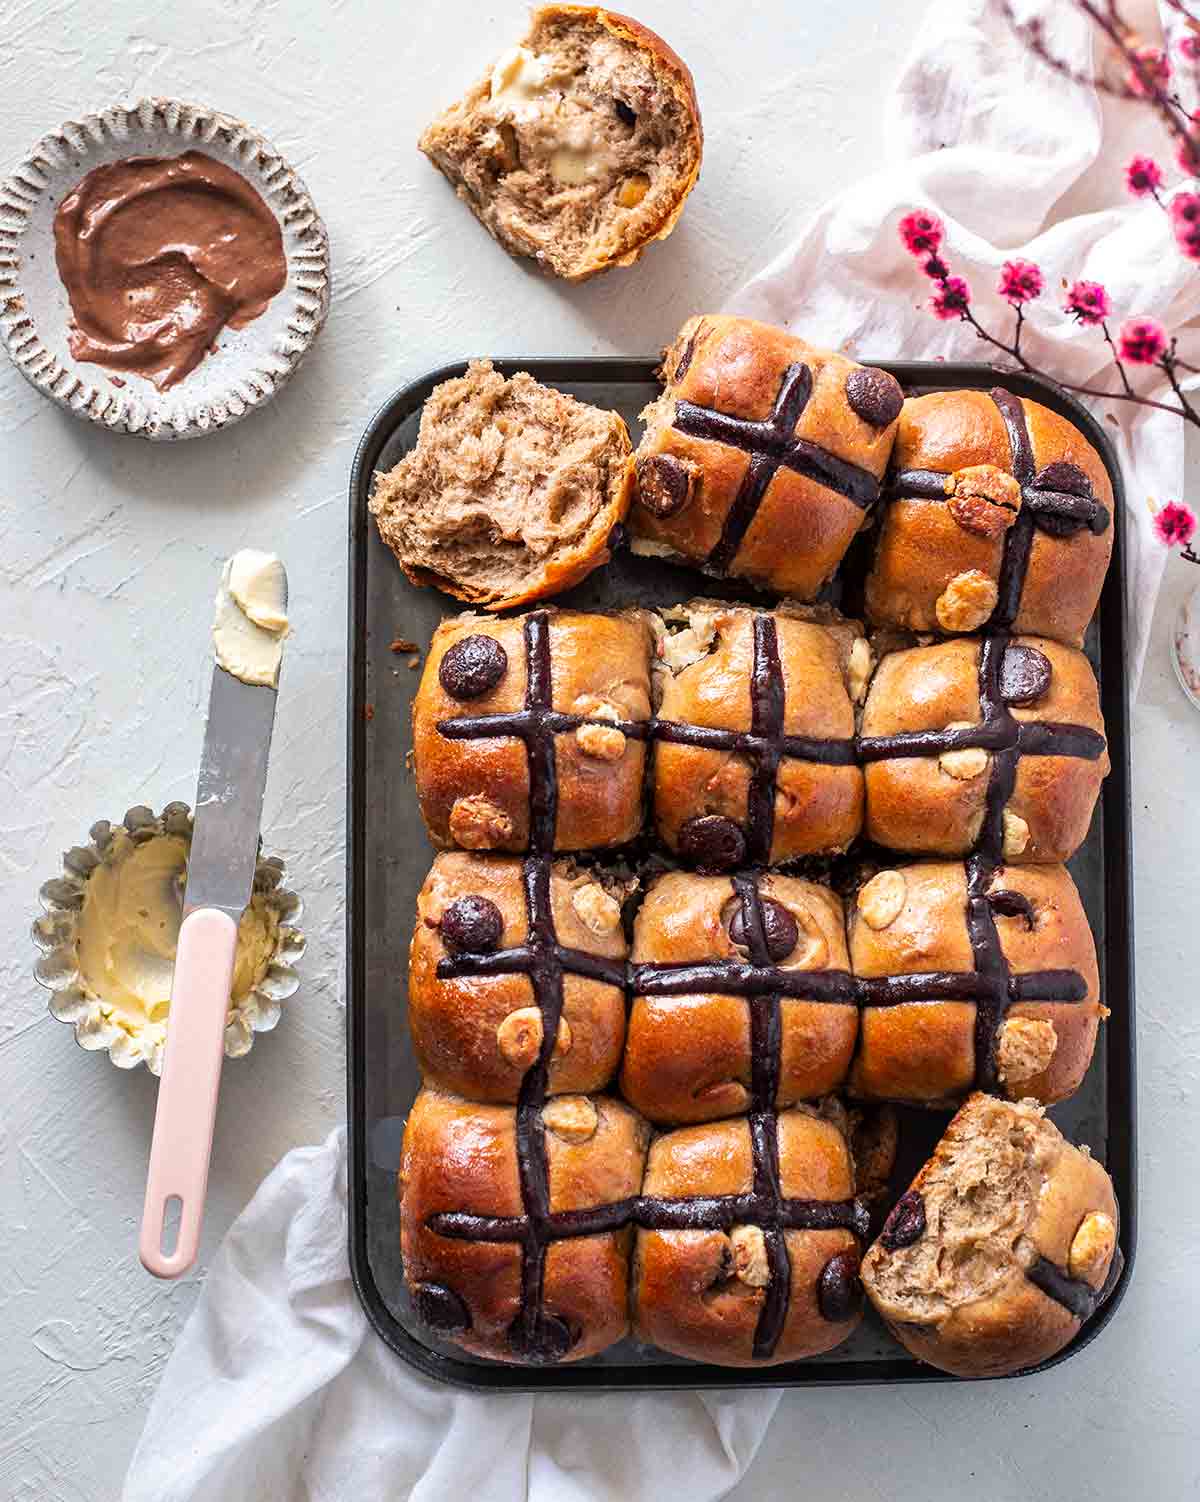 Double chocolate chip hot cross buns on baking tray. One hot cross bun is cut open and one side has vegan butter spread melting on it.